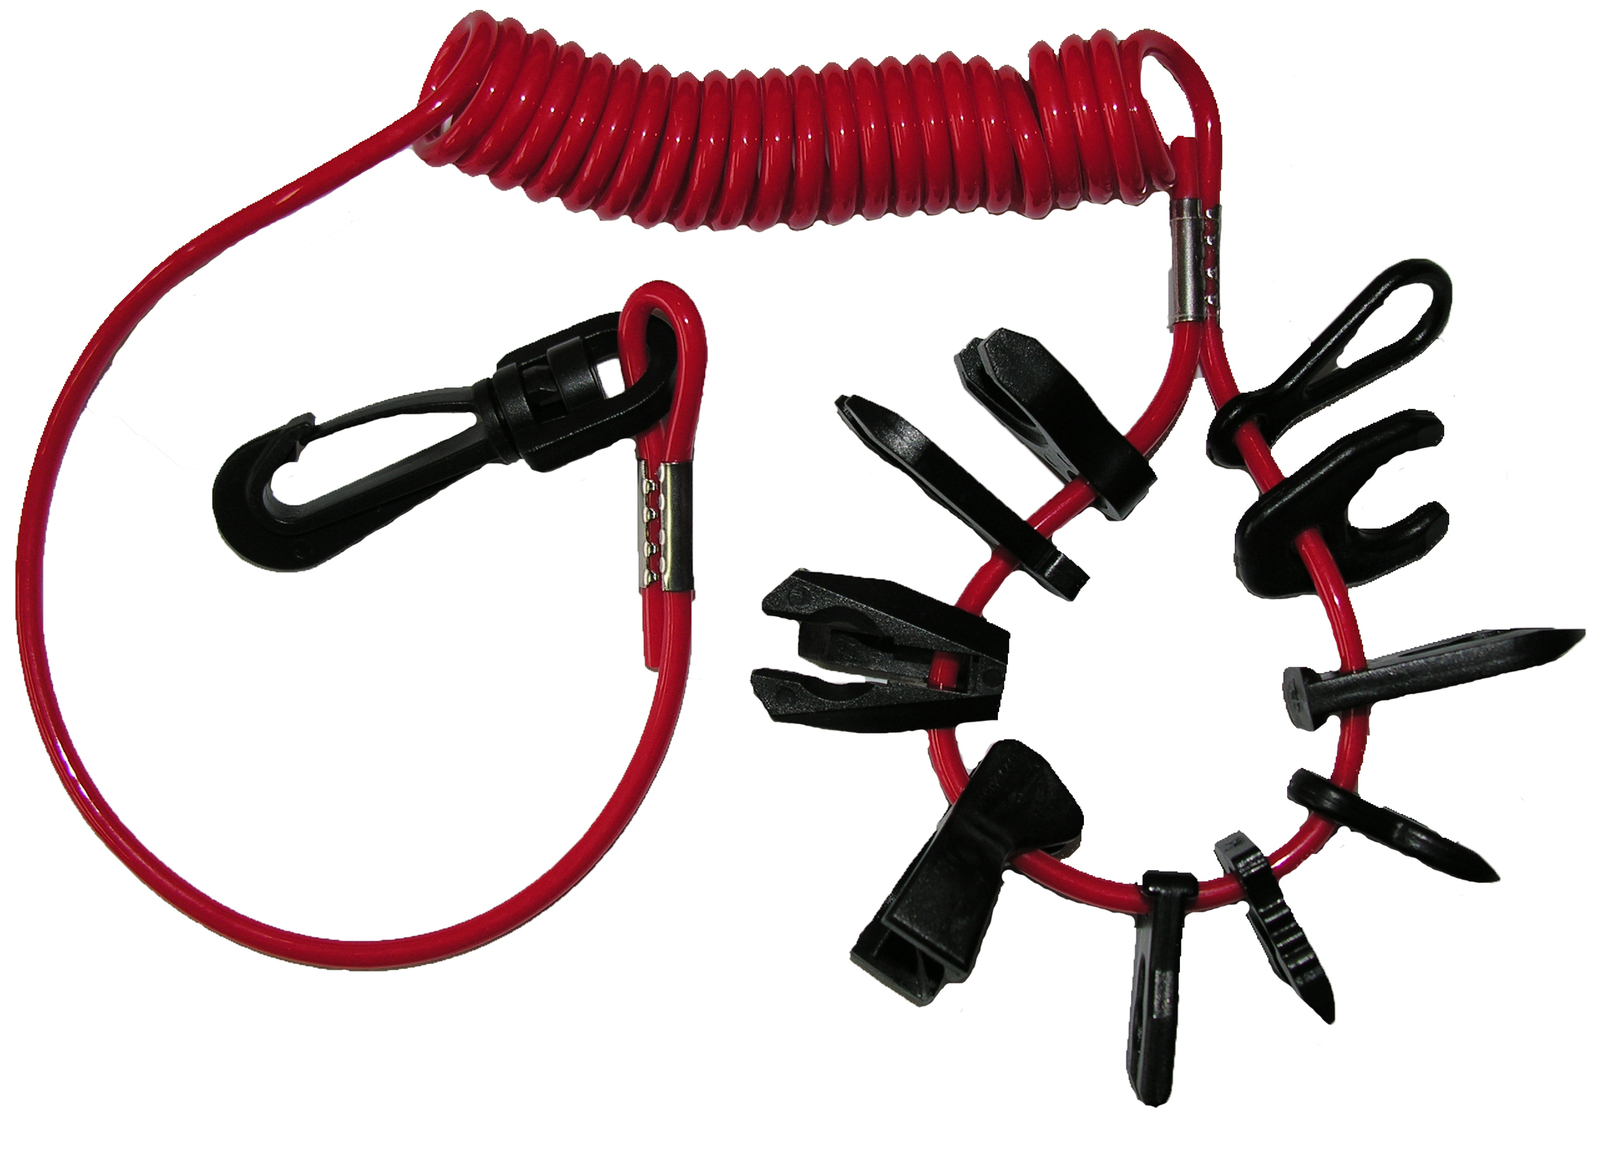 10 Key Emergency Cut-Off Kill Switch Key Kit With Coiled Safety Lanyard And Convenient Swivel Snap Hook 